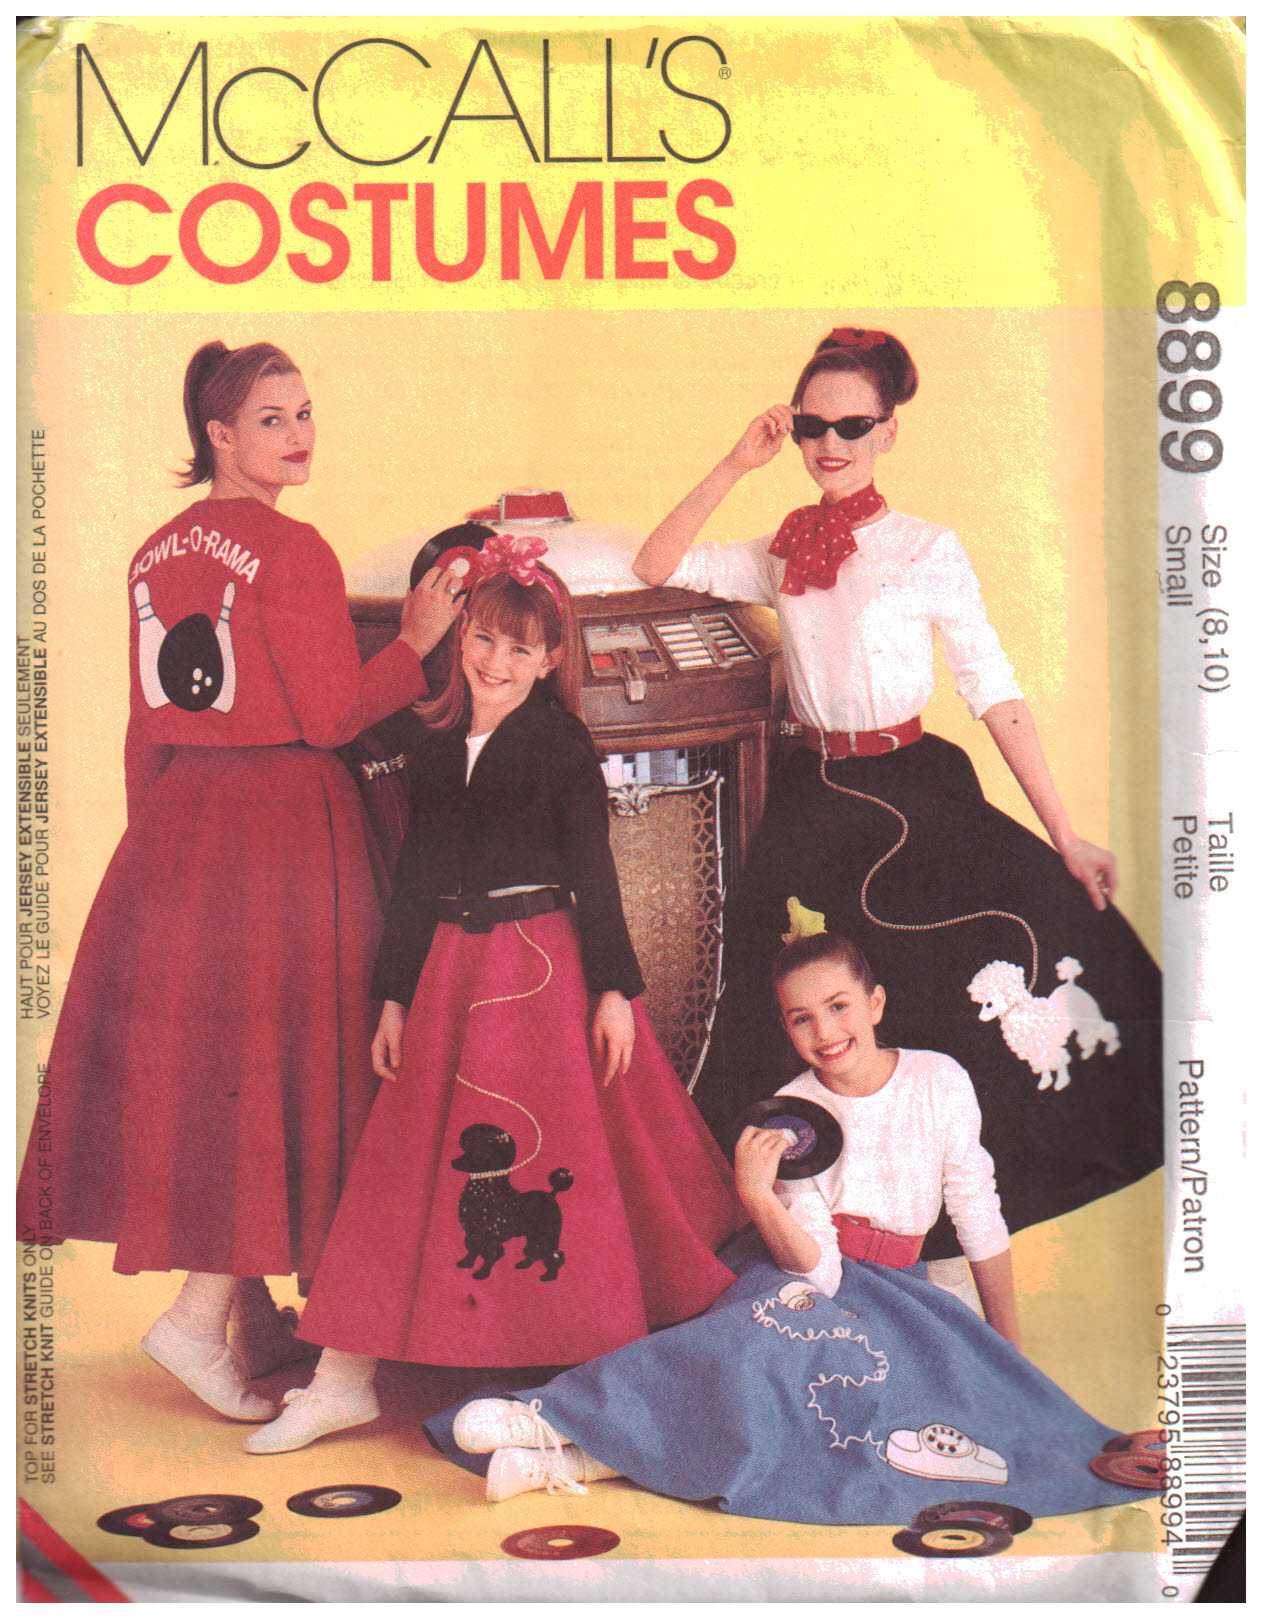 Poodle Skirts  Poodle Skirt Costumes Patterns History